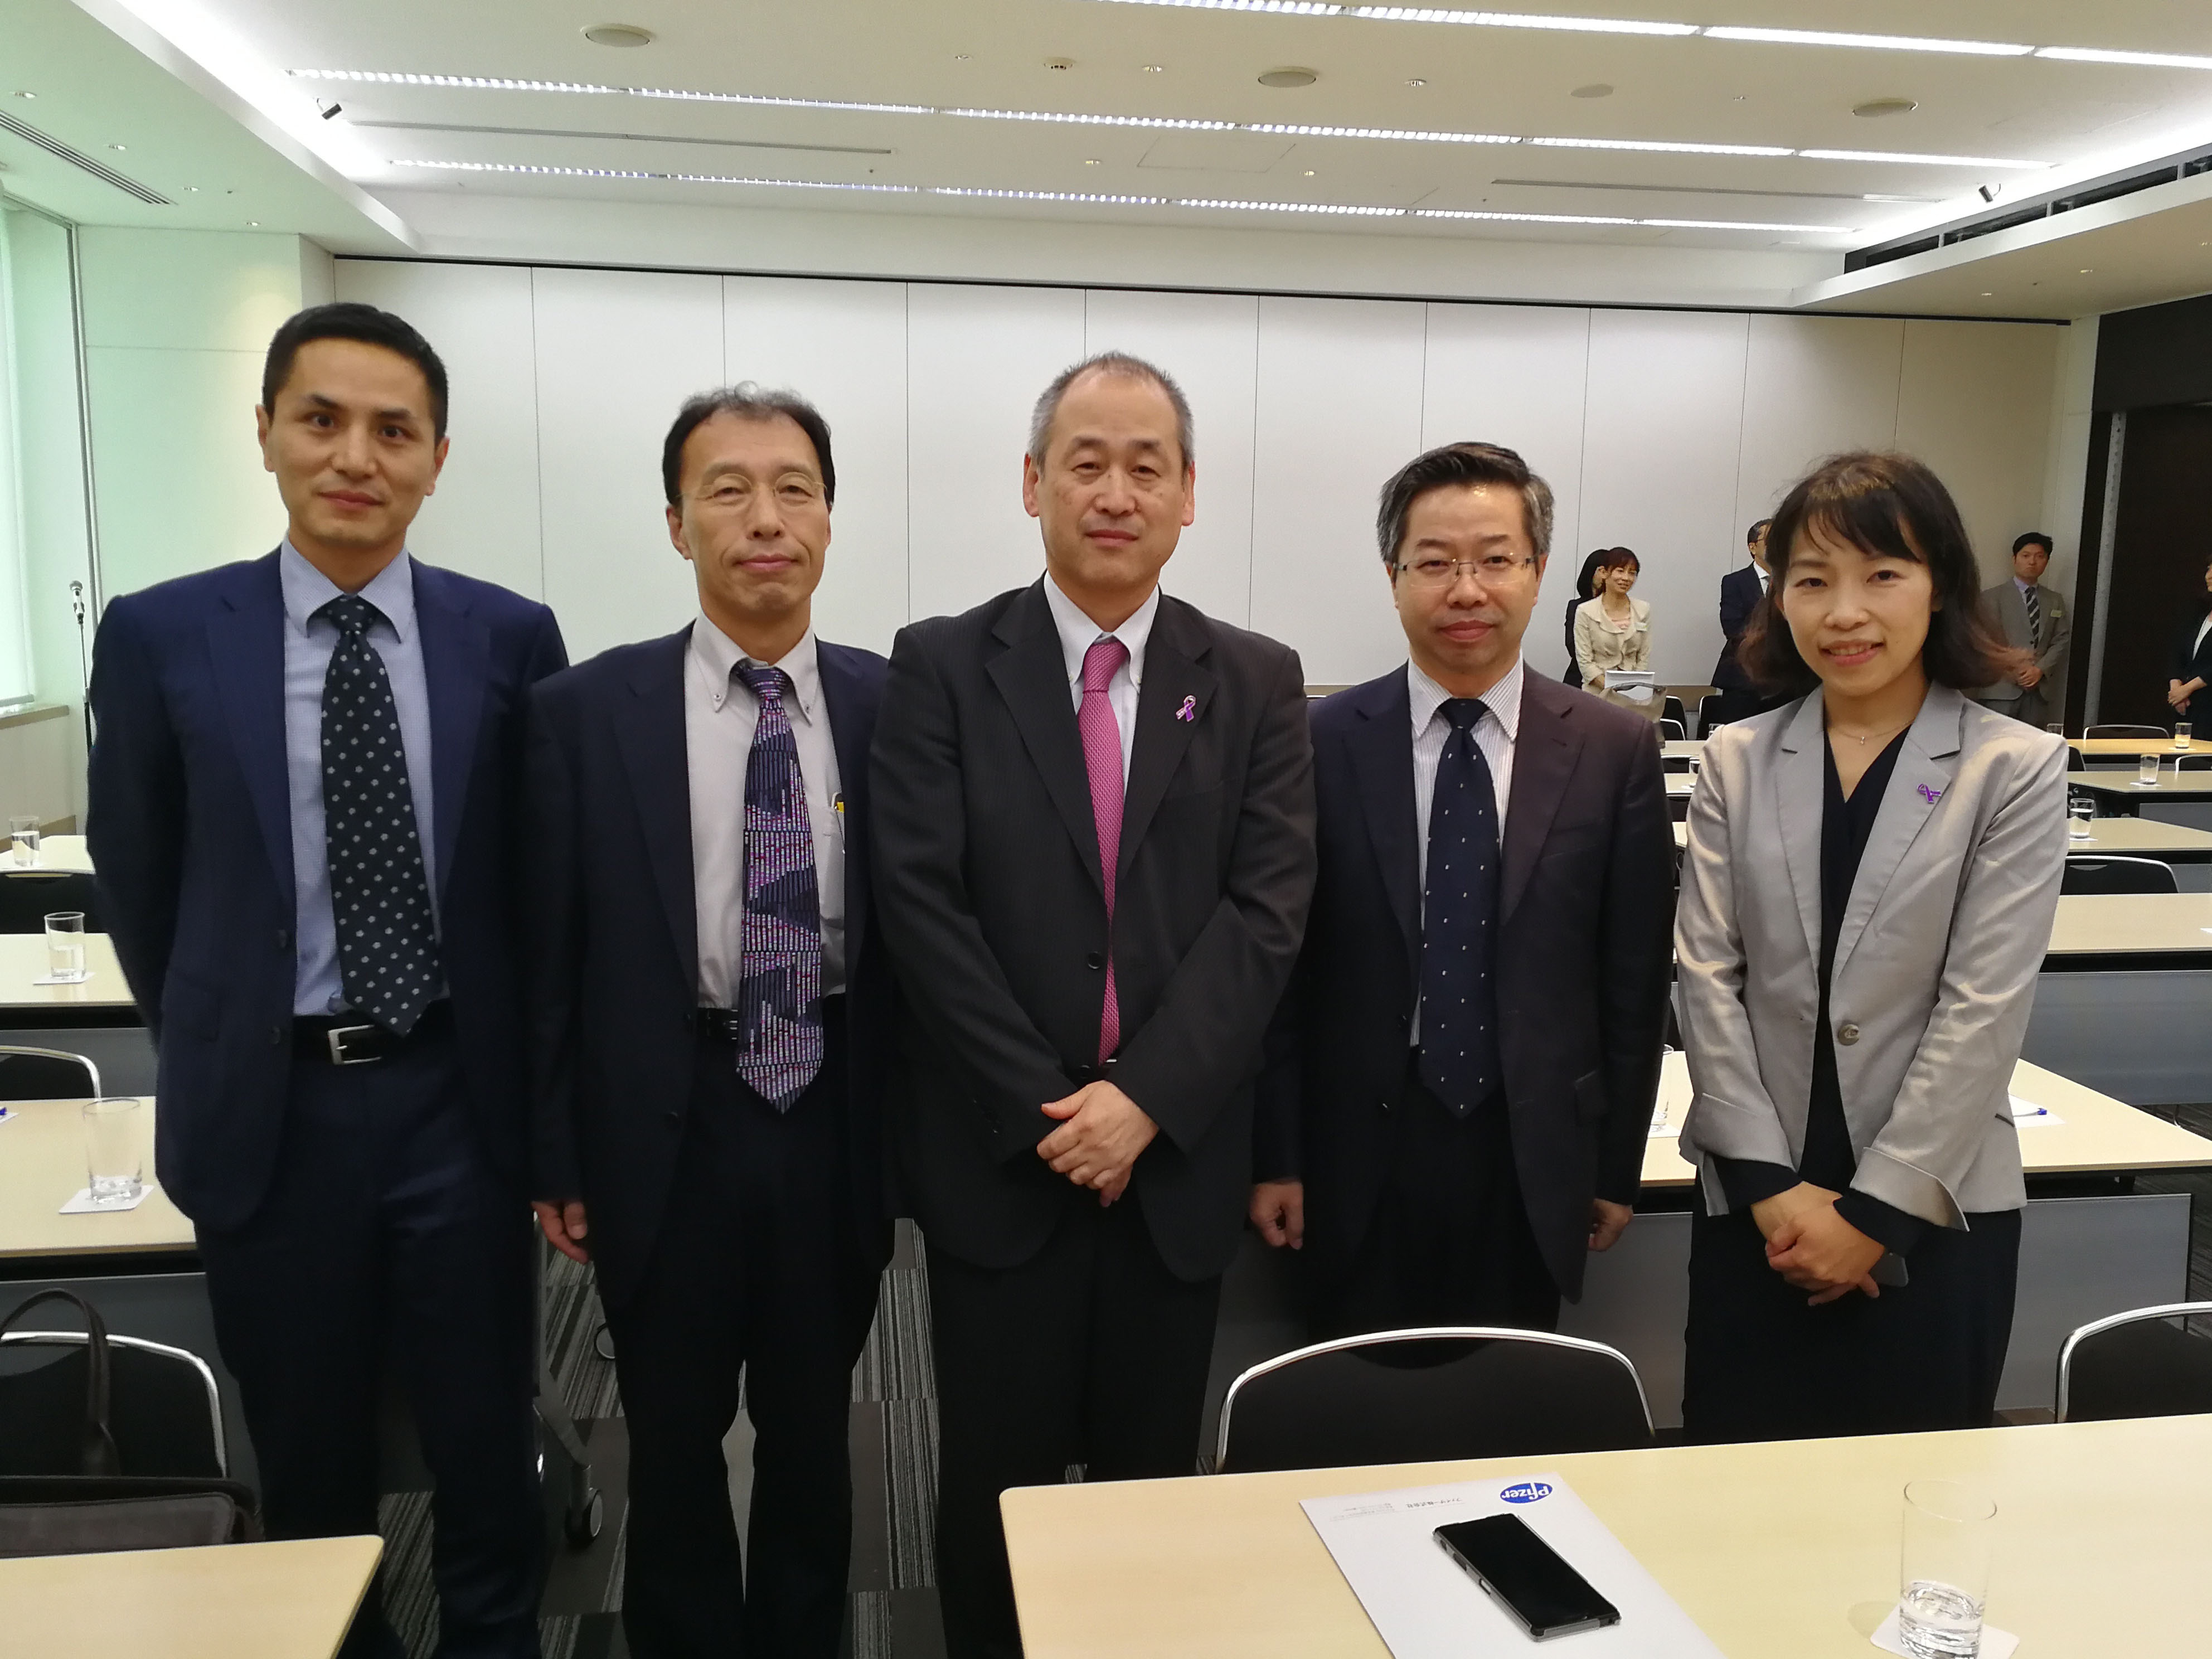 AmoyDx attended News Conference of Xalkori ROS1 approval in Japan